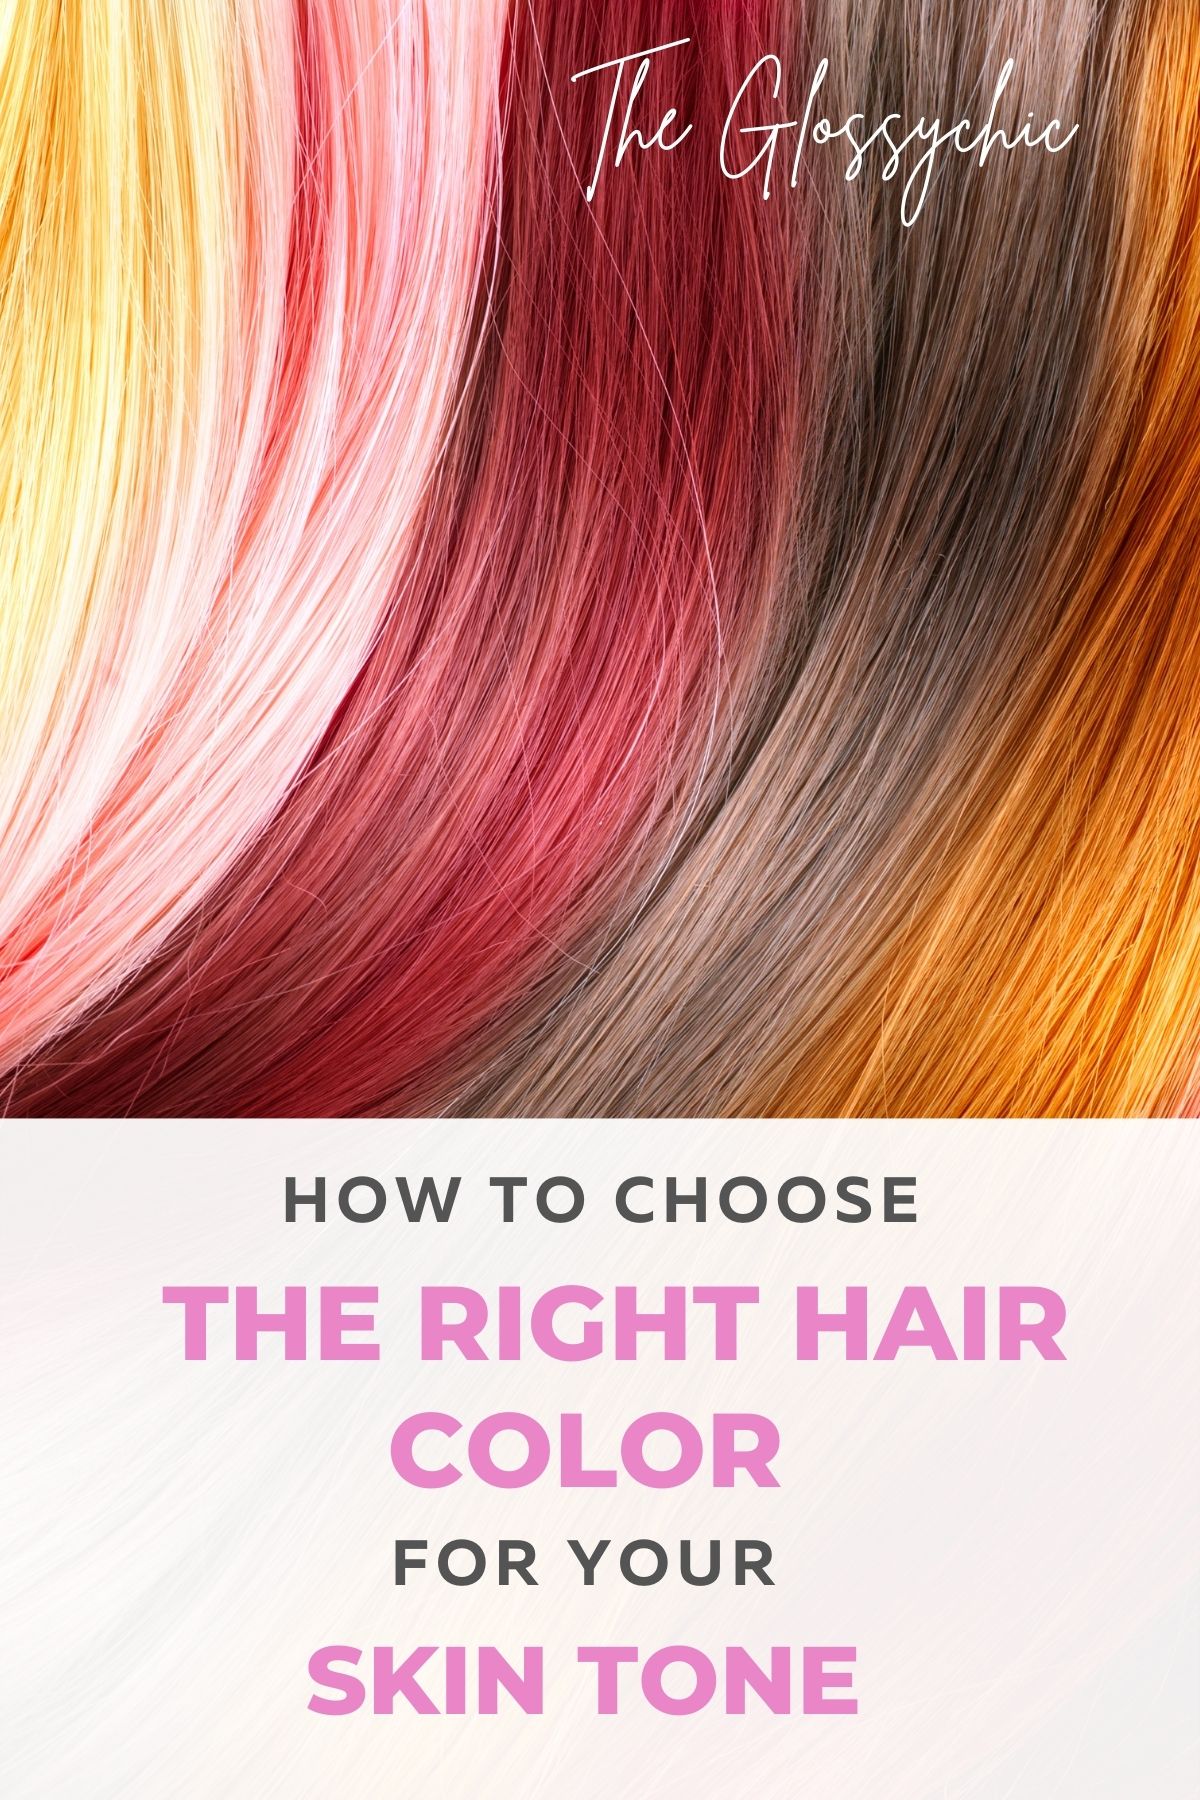 How To Choose The Right Hair Color For Your Skin Tone